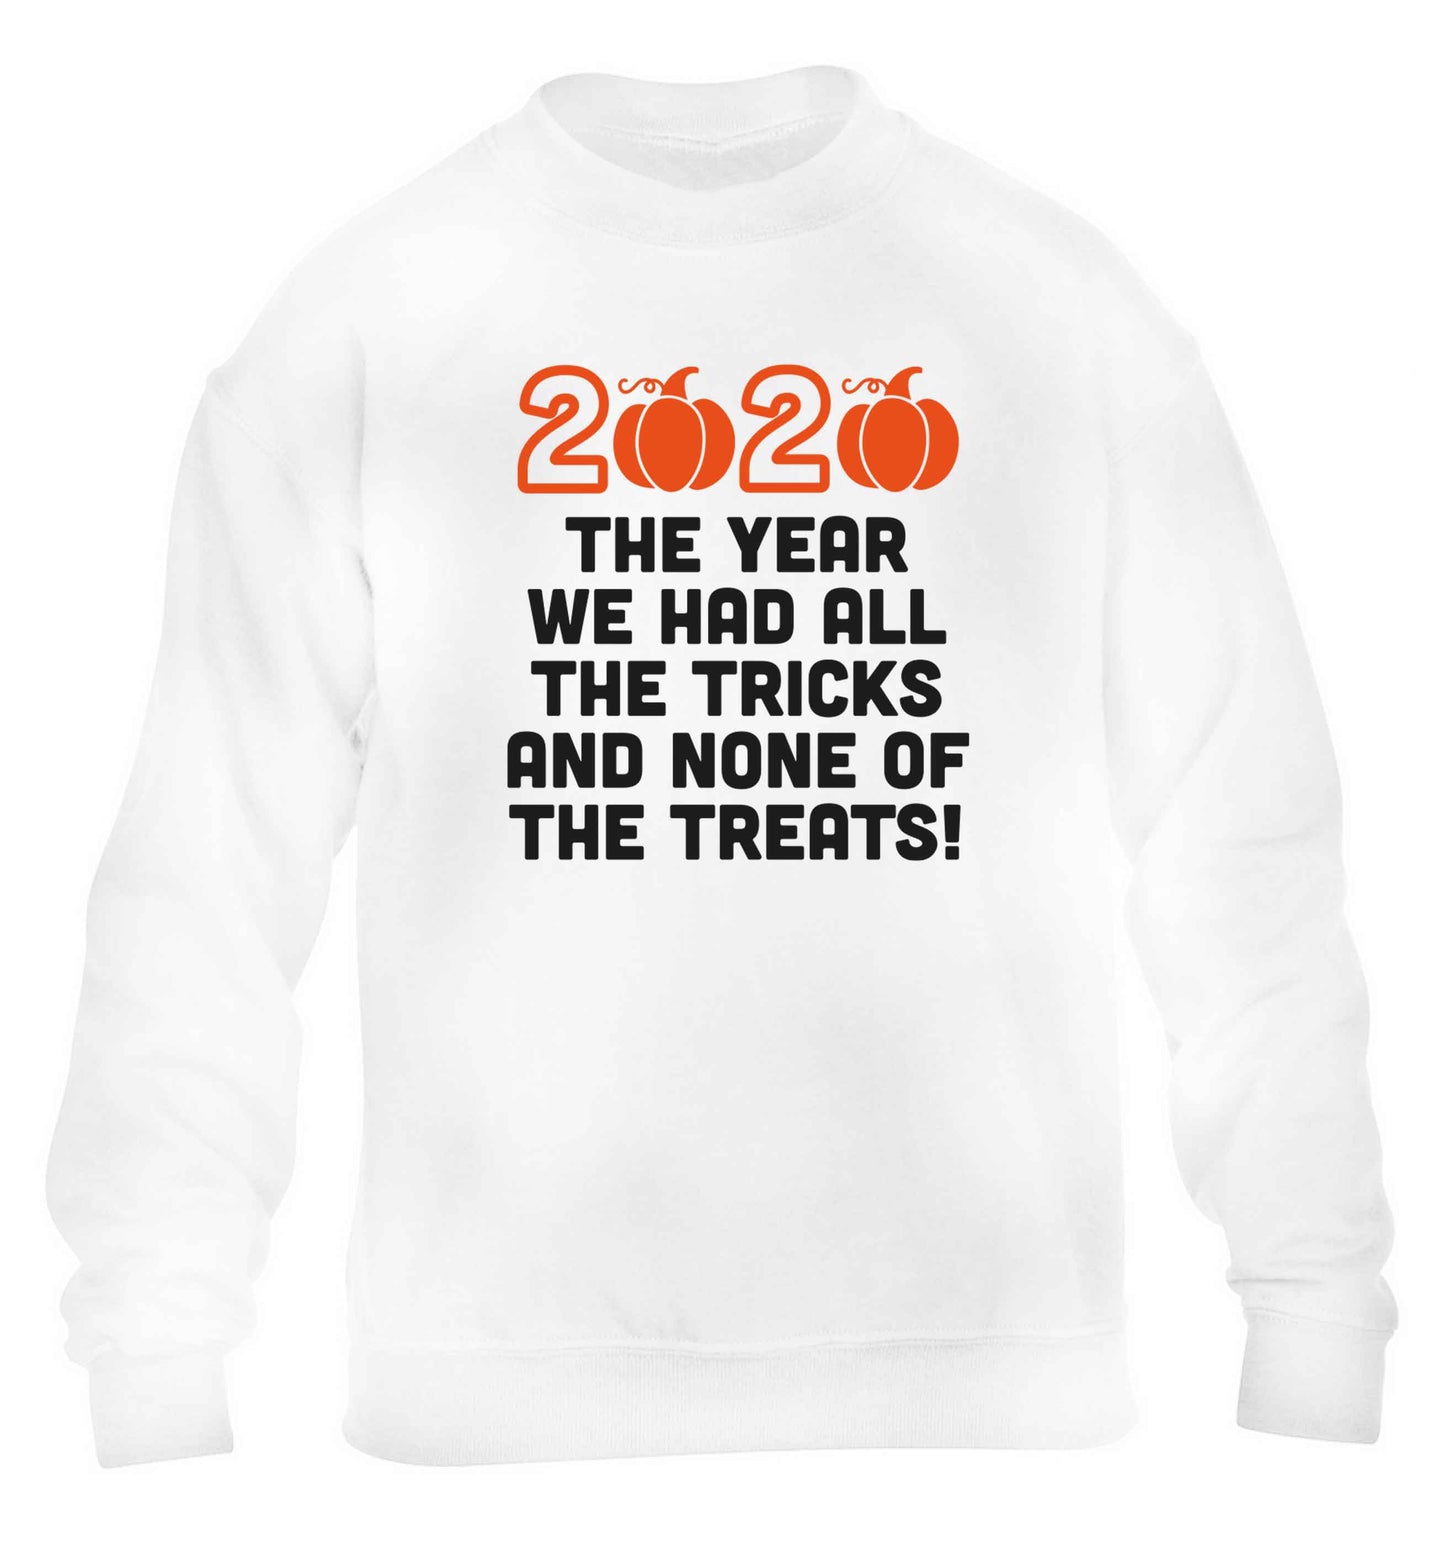 2020 The year we had all of the tricks and none of the treats children's white sweater 12-13 Years